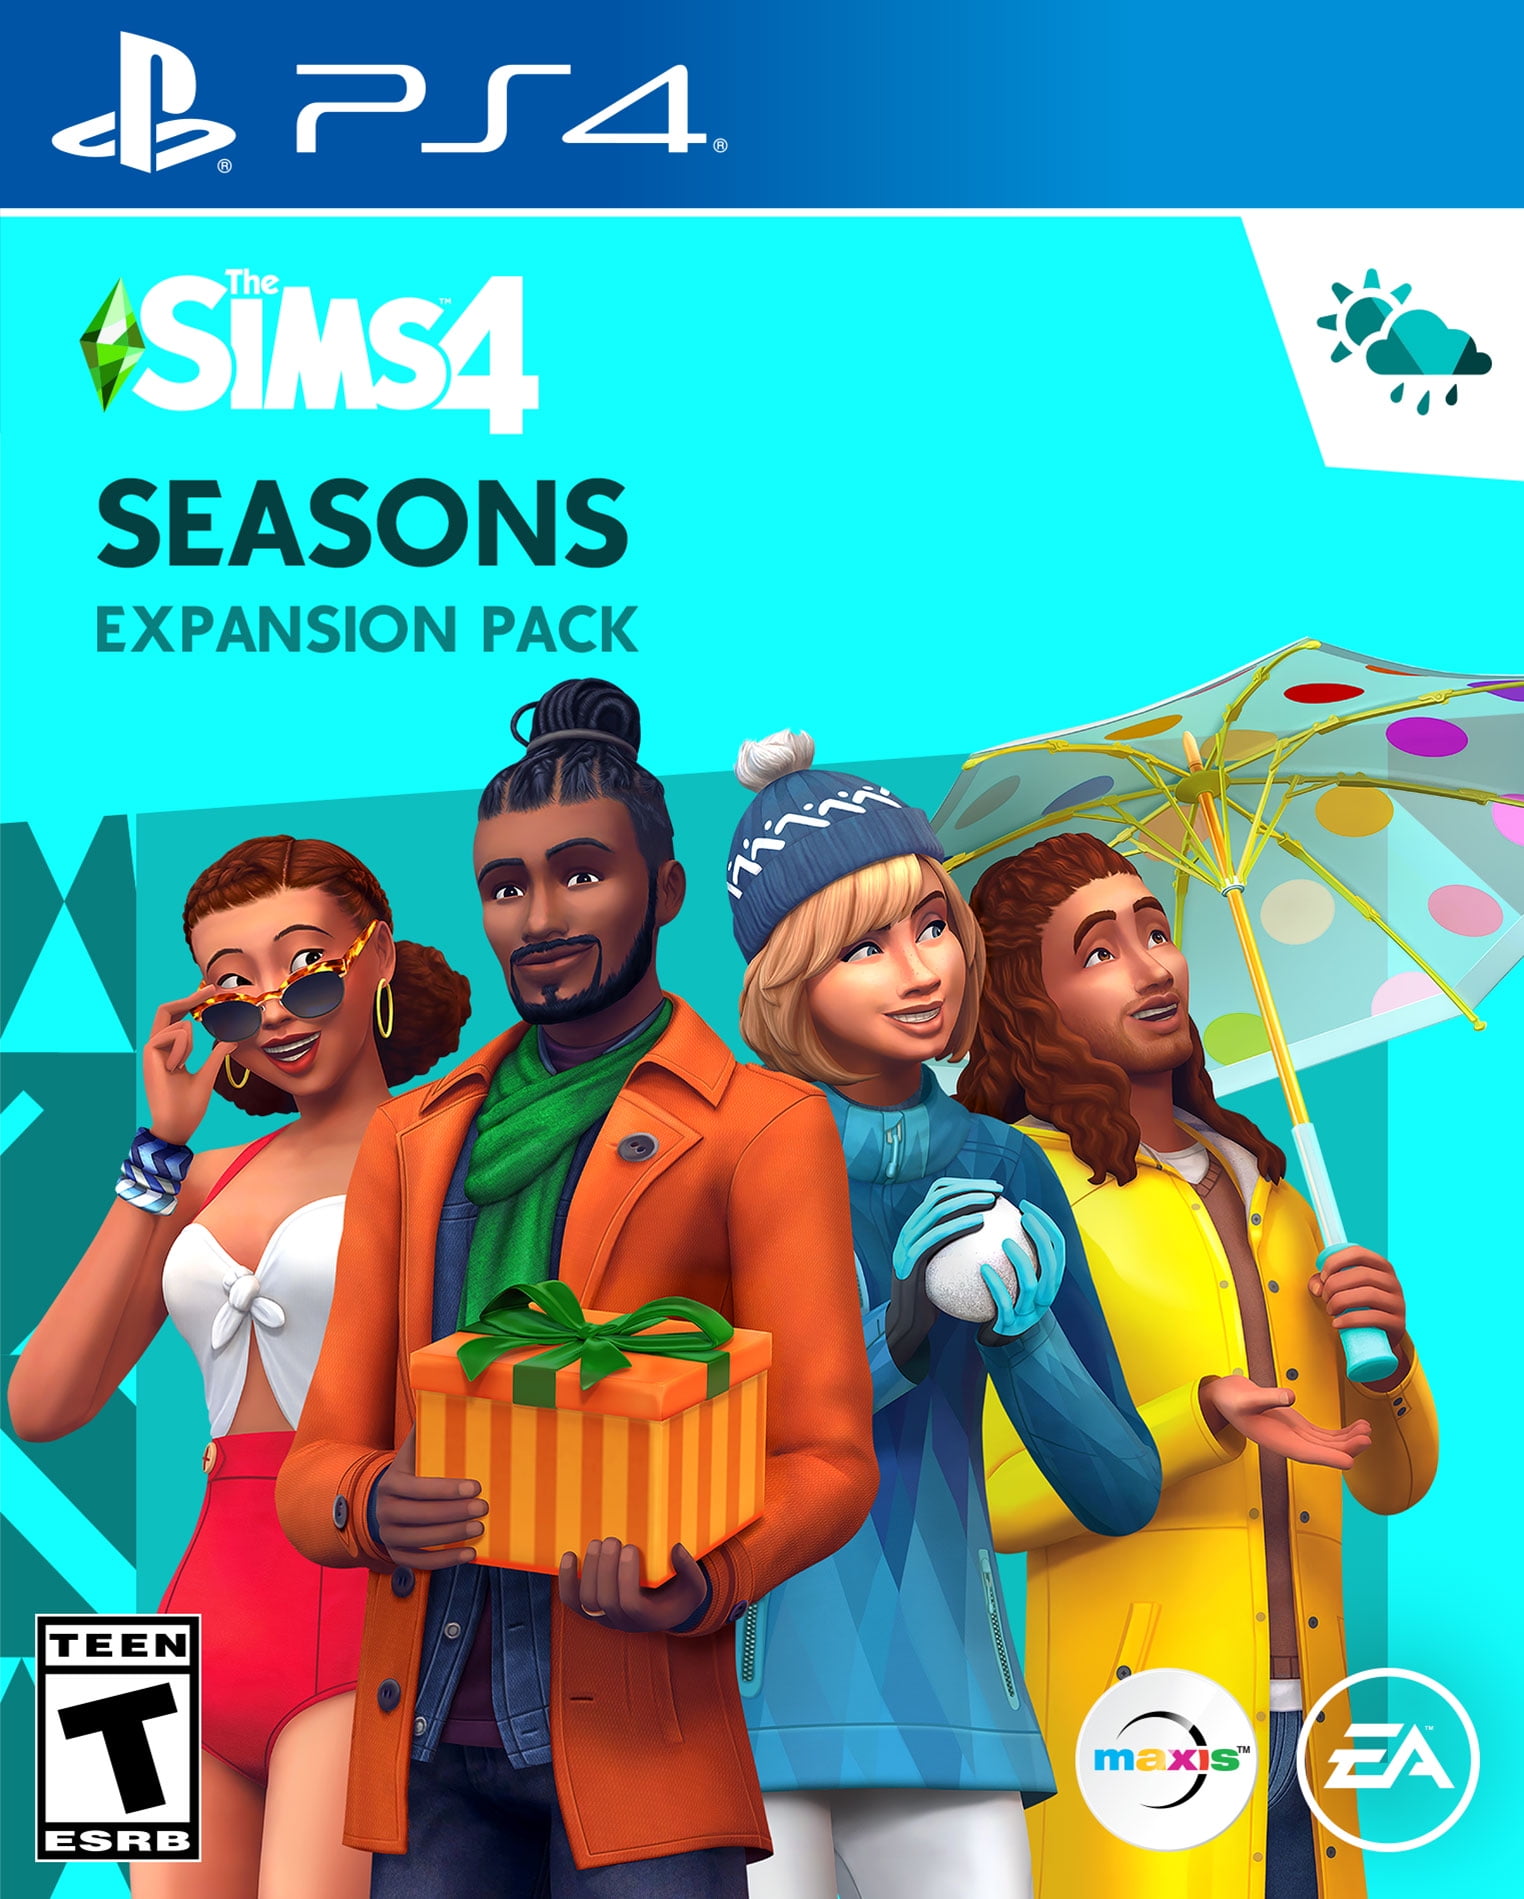 the sims 4 ps4 digital download